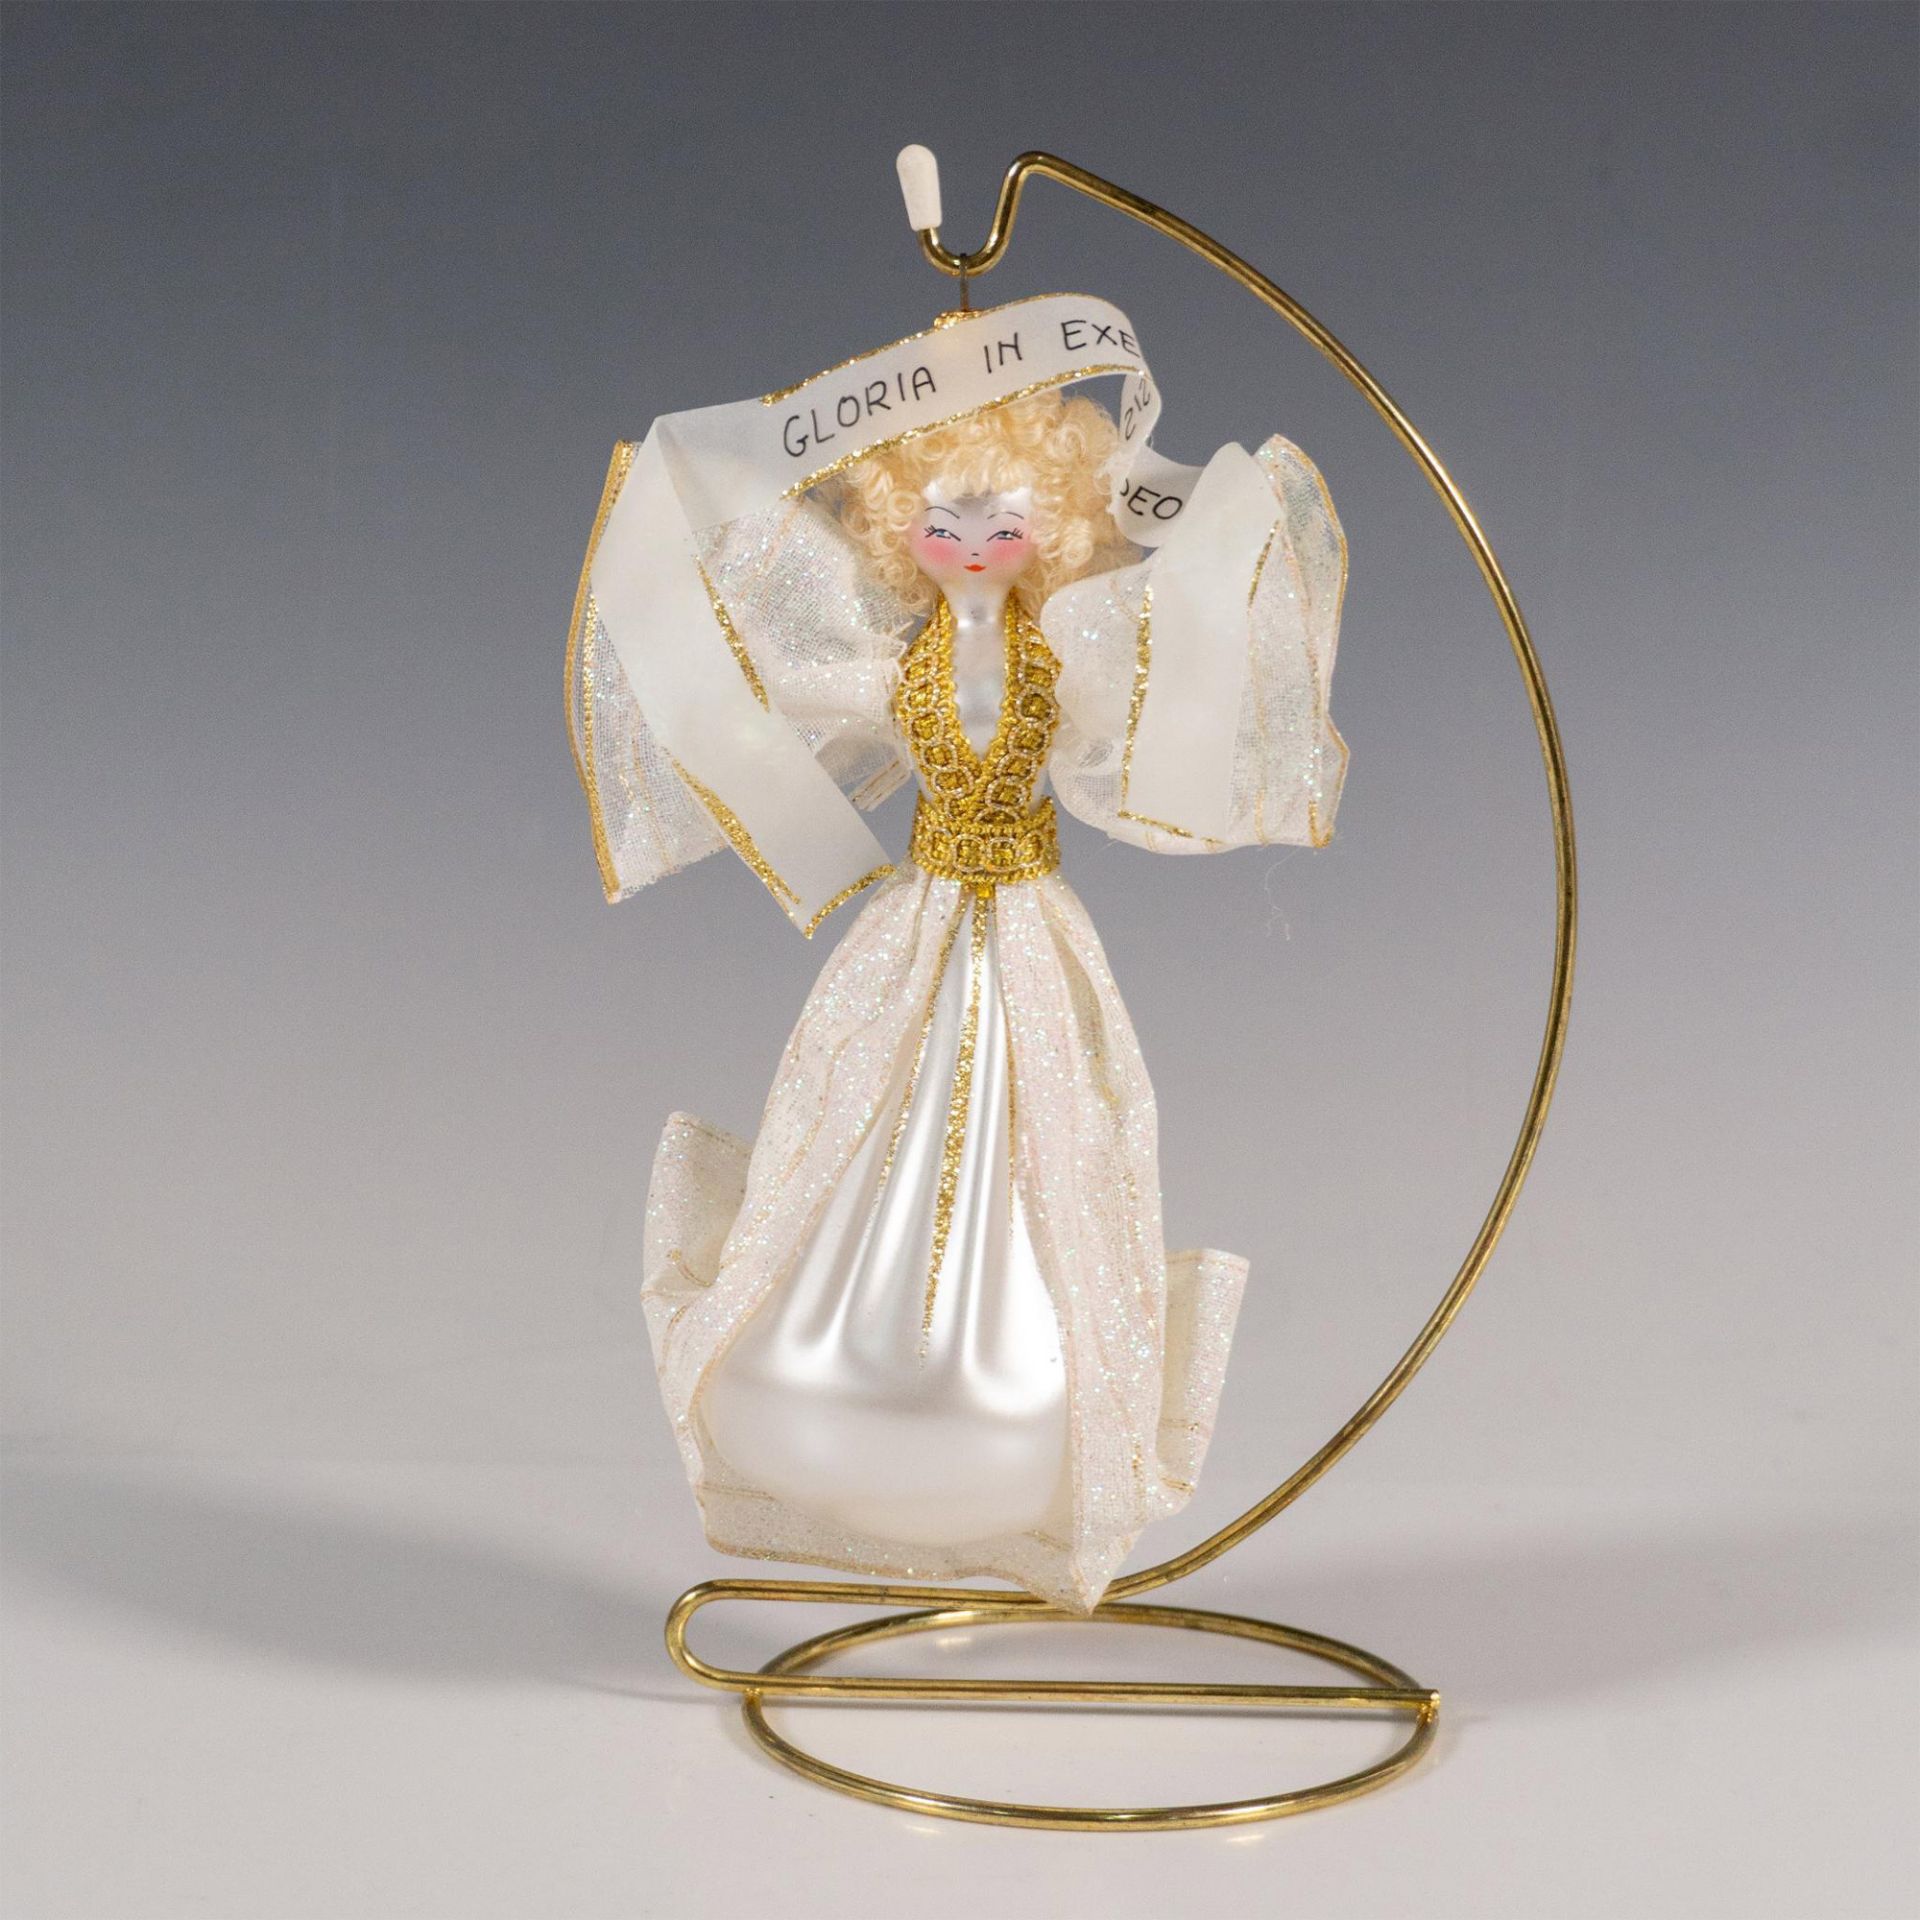 Glass Blown Christmas Ornament, Gloria in Excelsis Deo